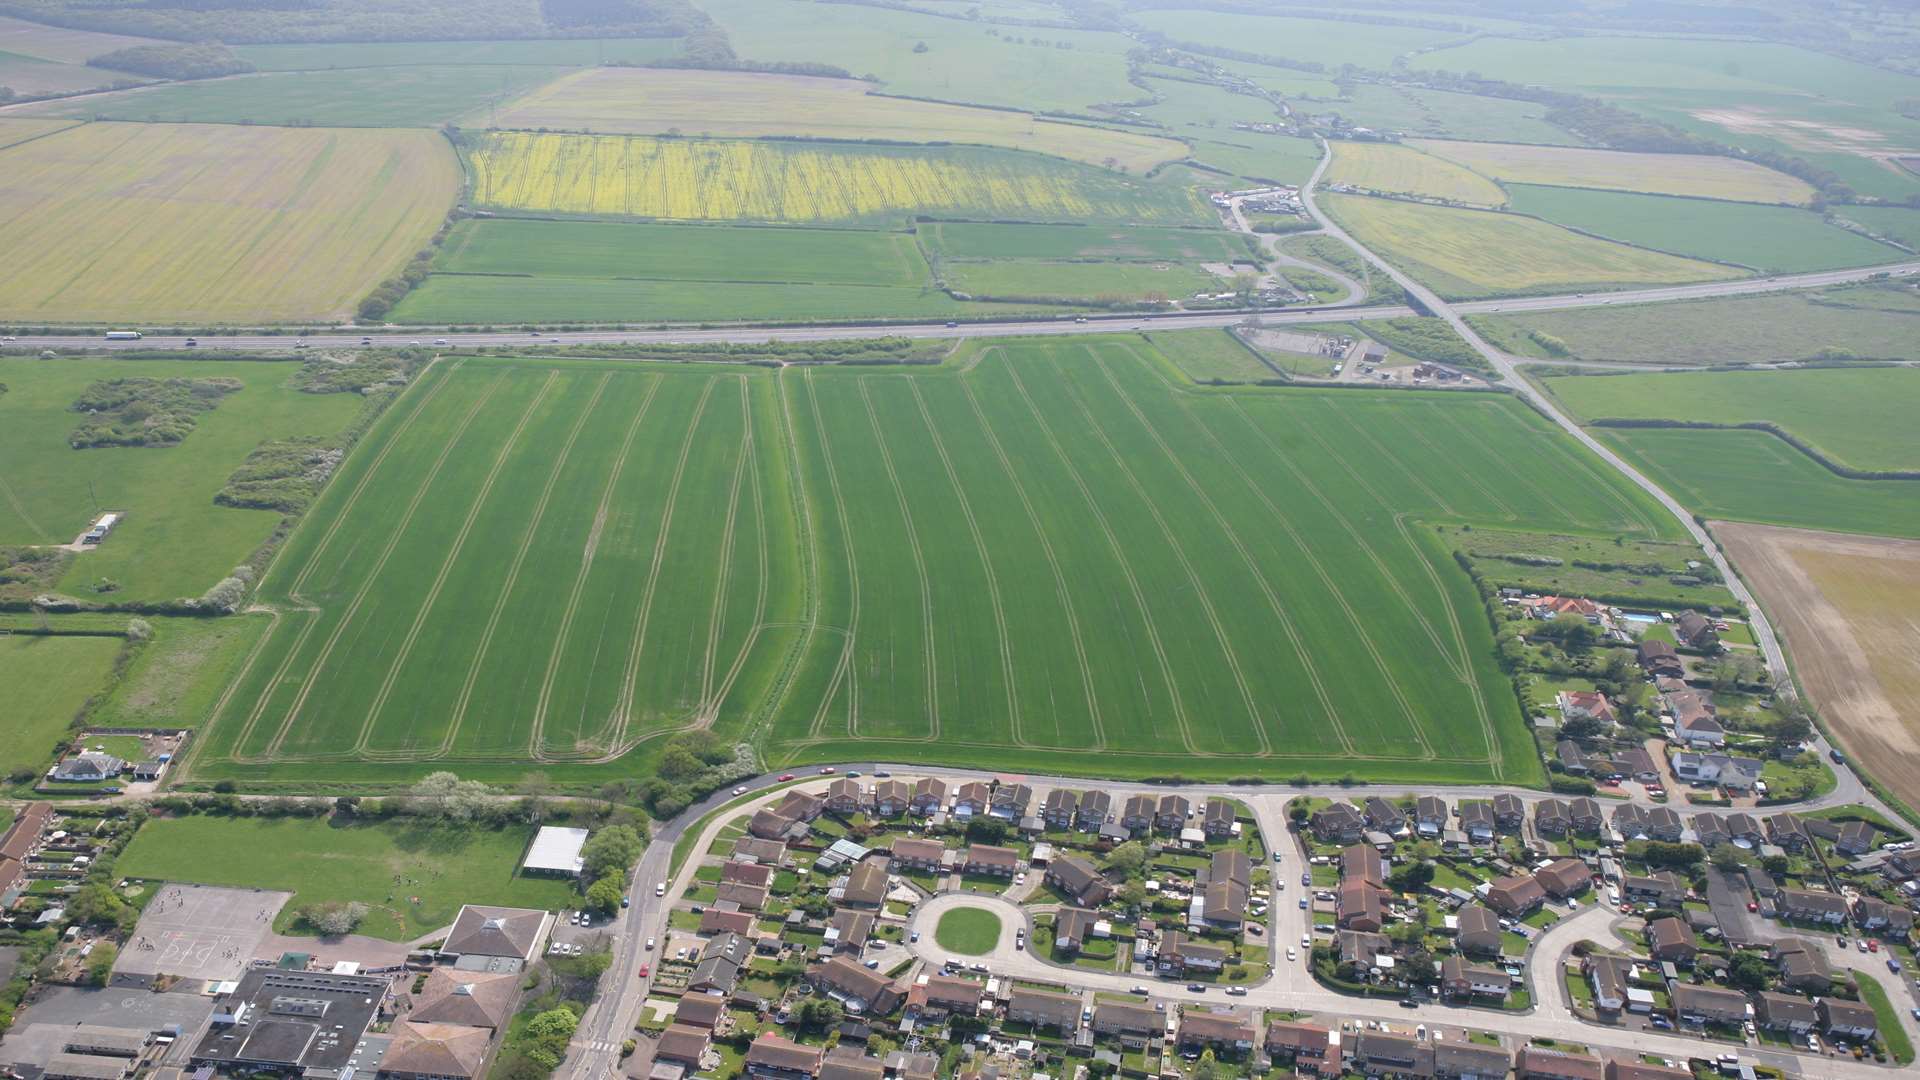 The 53-acre plot of land is located between Greenhill Road, Thornden Wood Road and the Thanet Way.